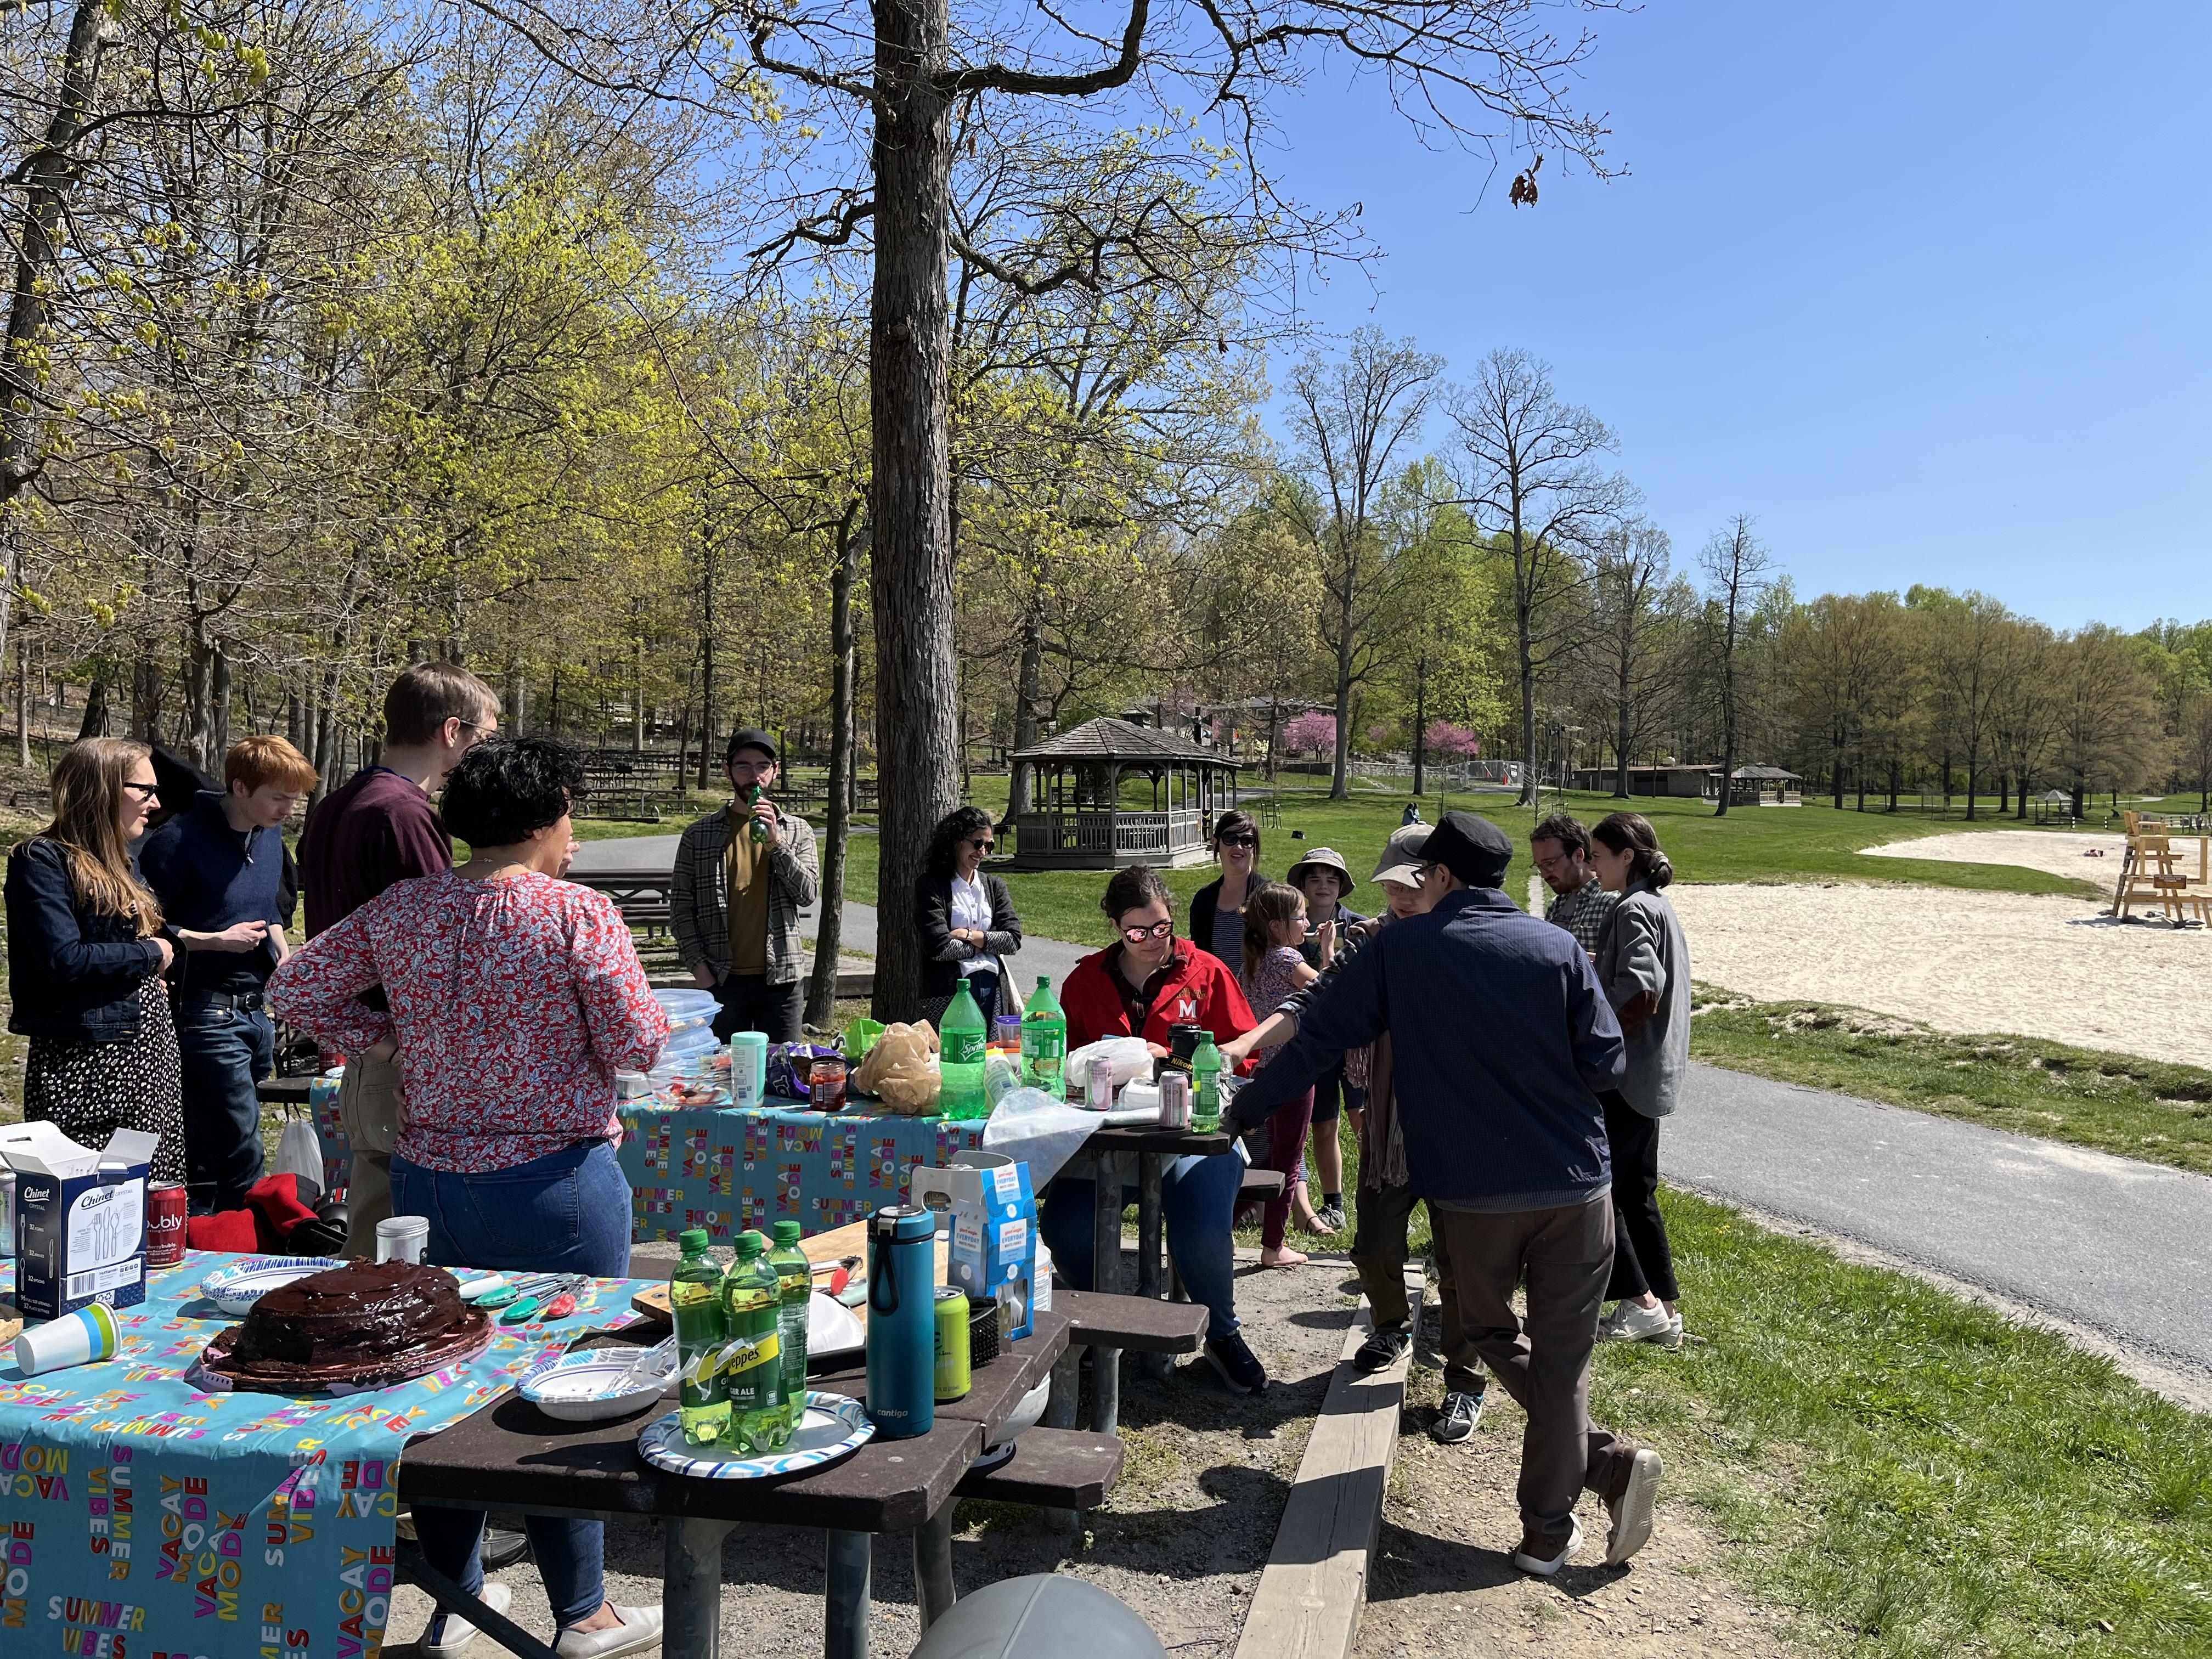 People standing by a table in the park